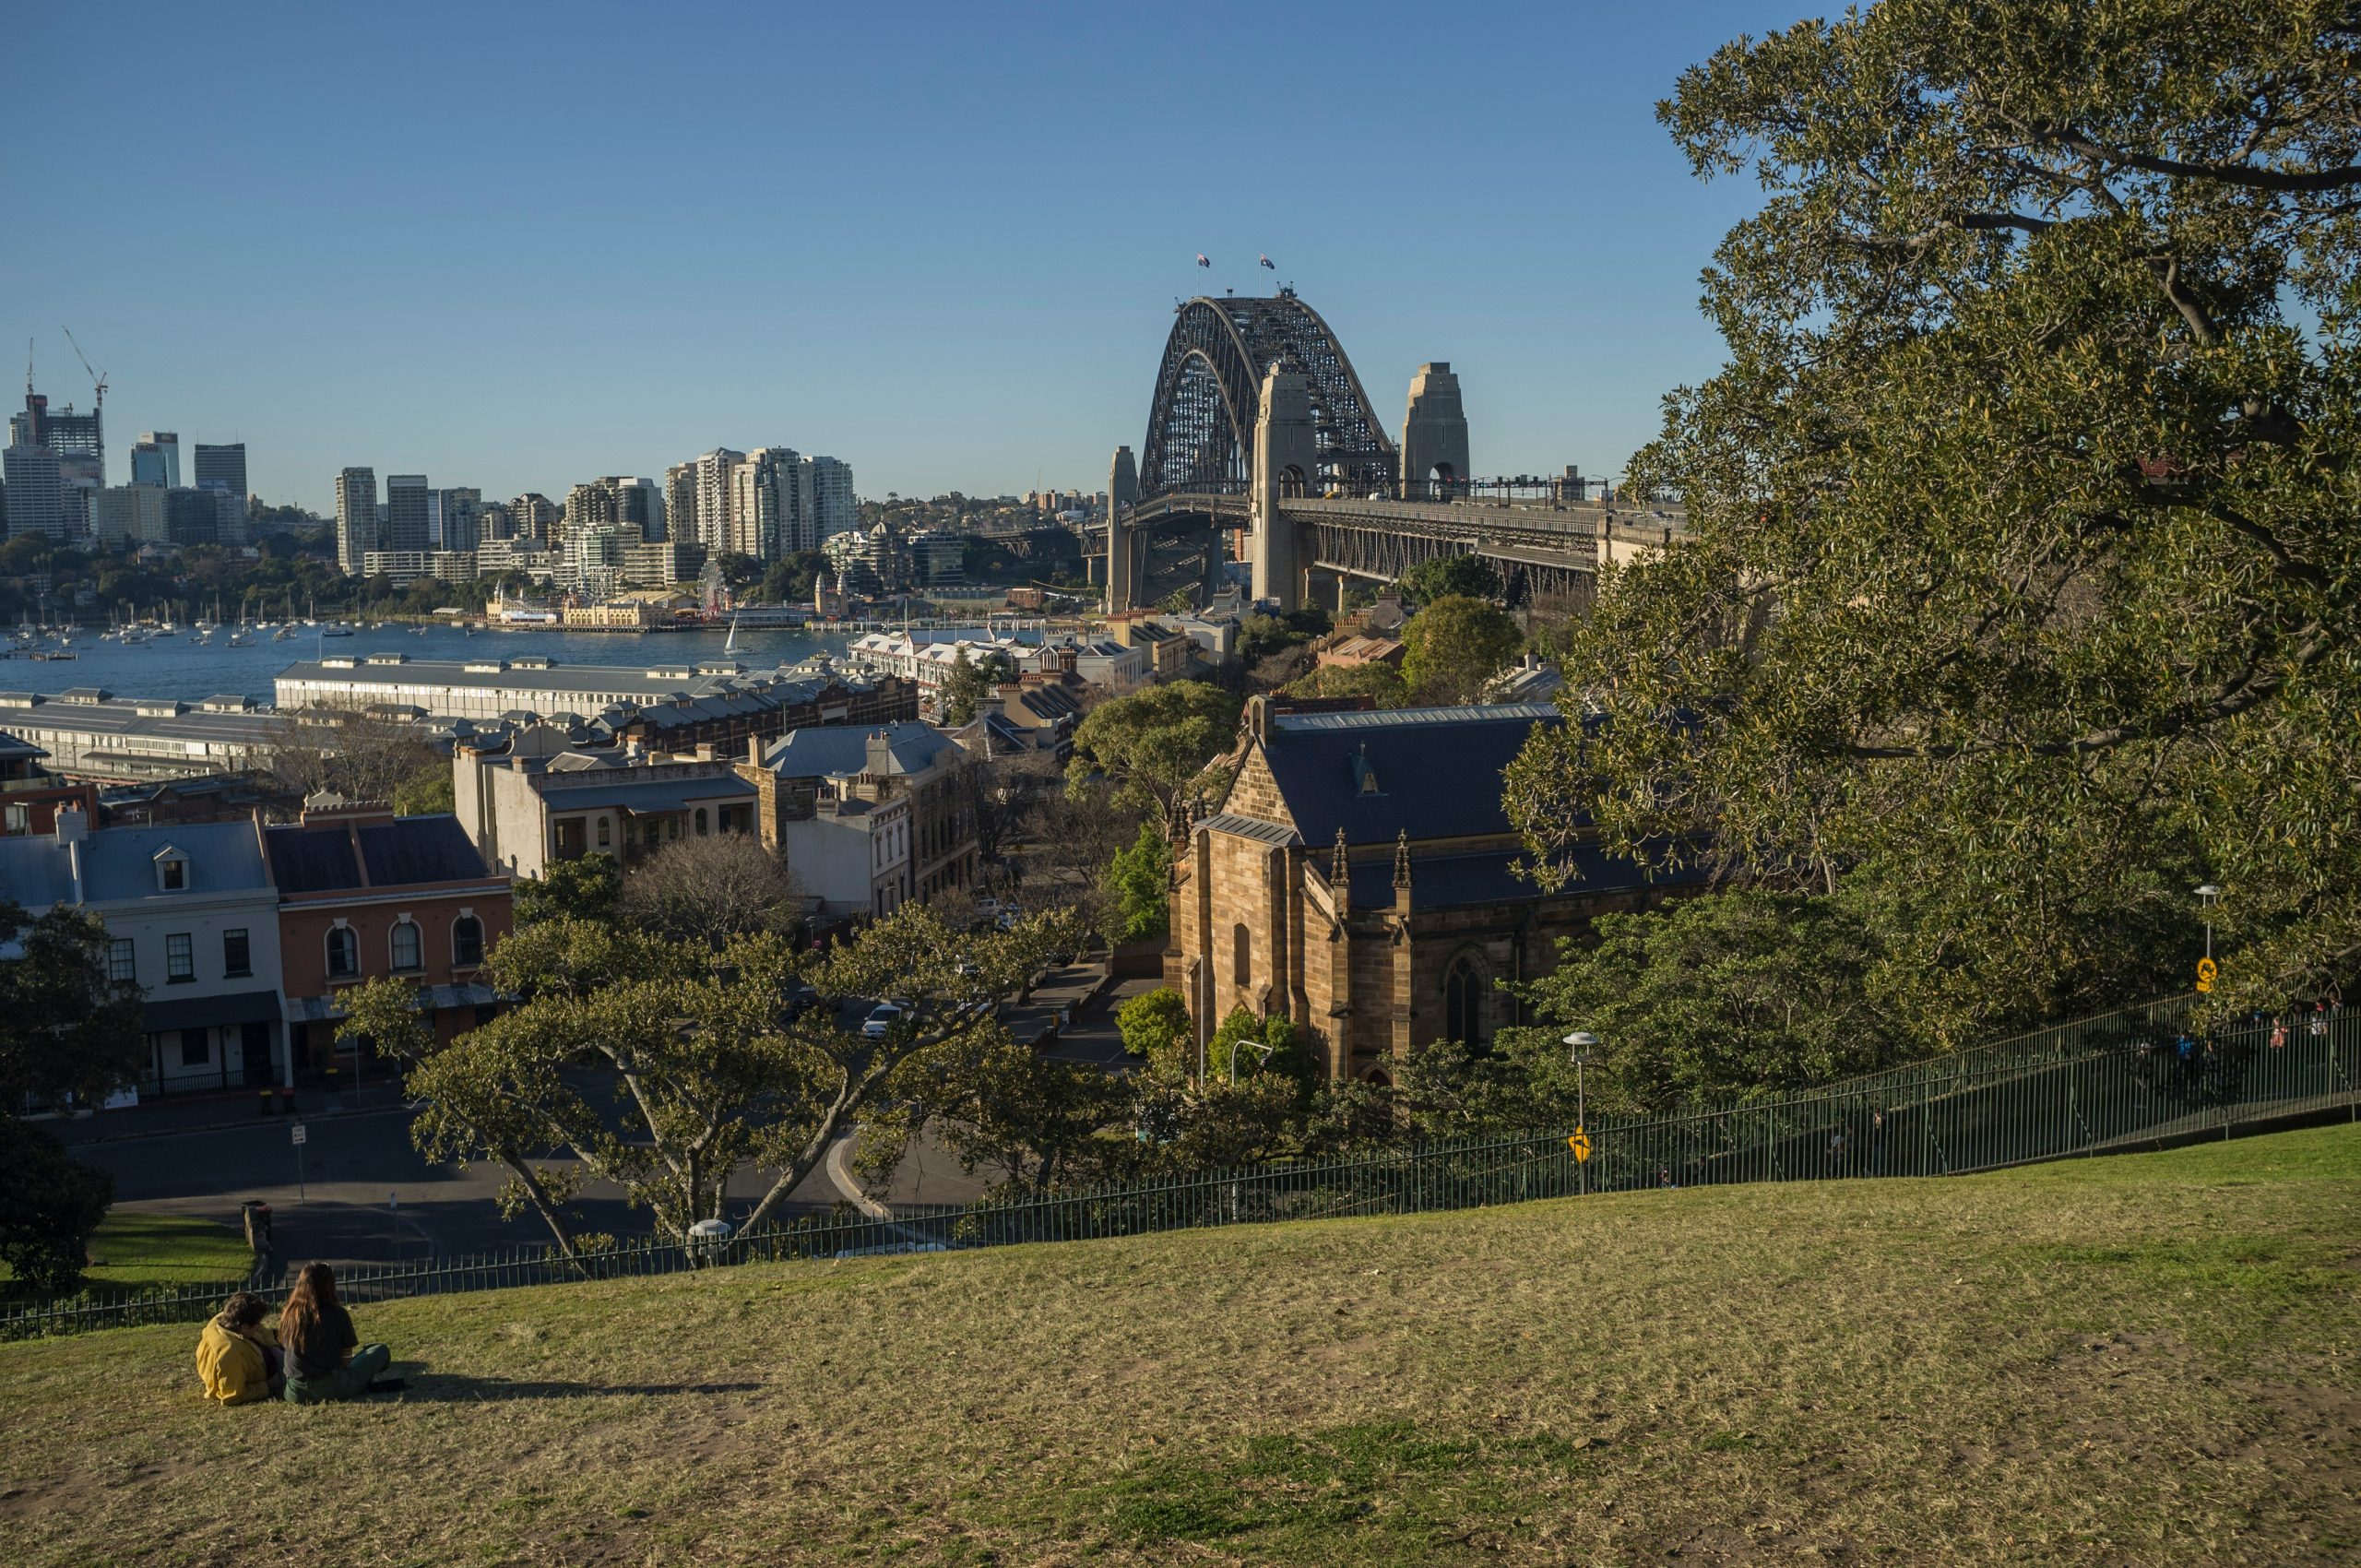 Skyline view from a park overlooking the Sydney Harbour Bridge